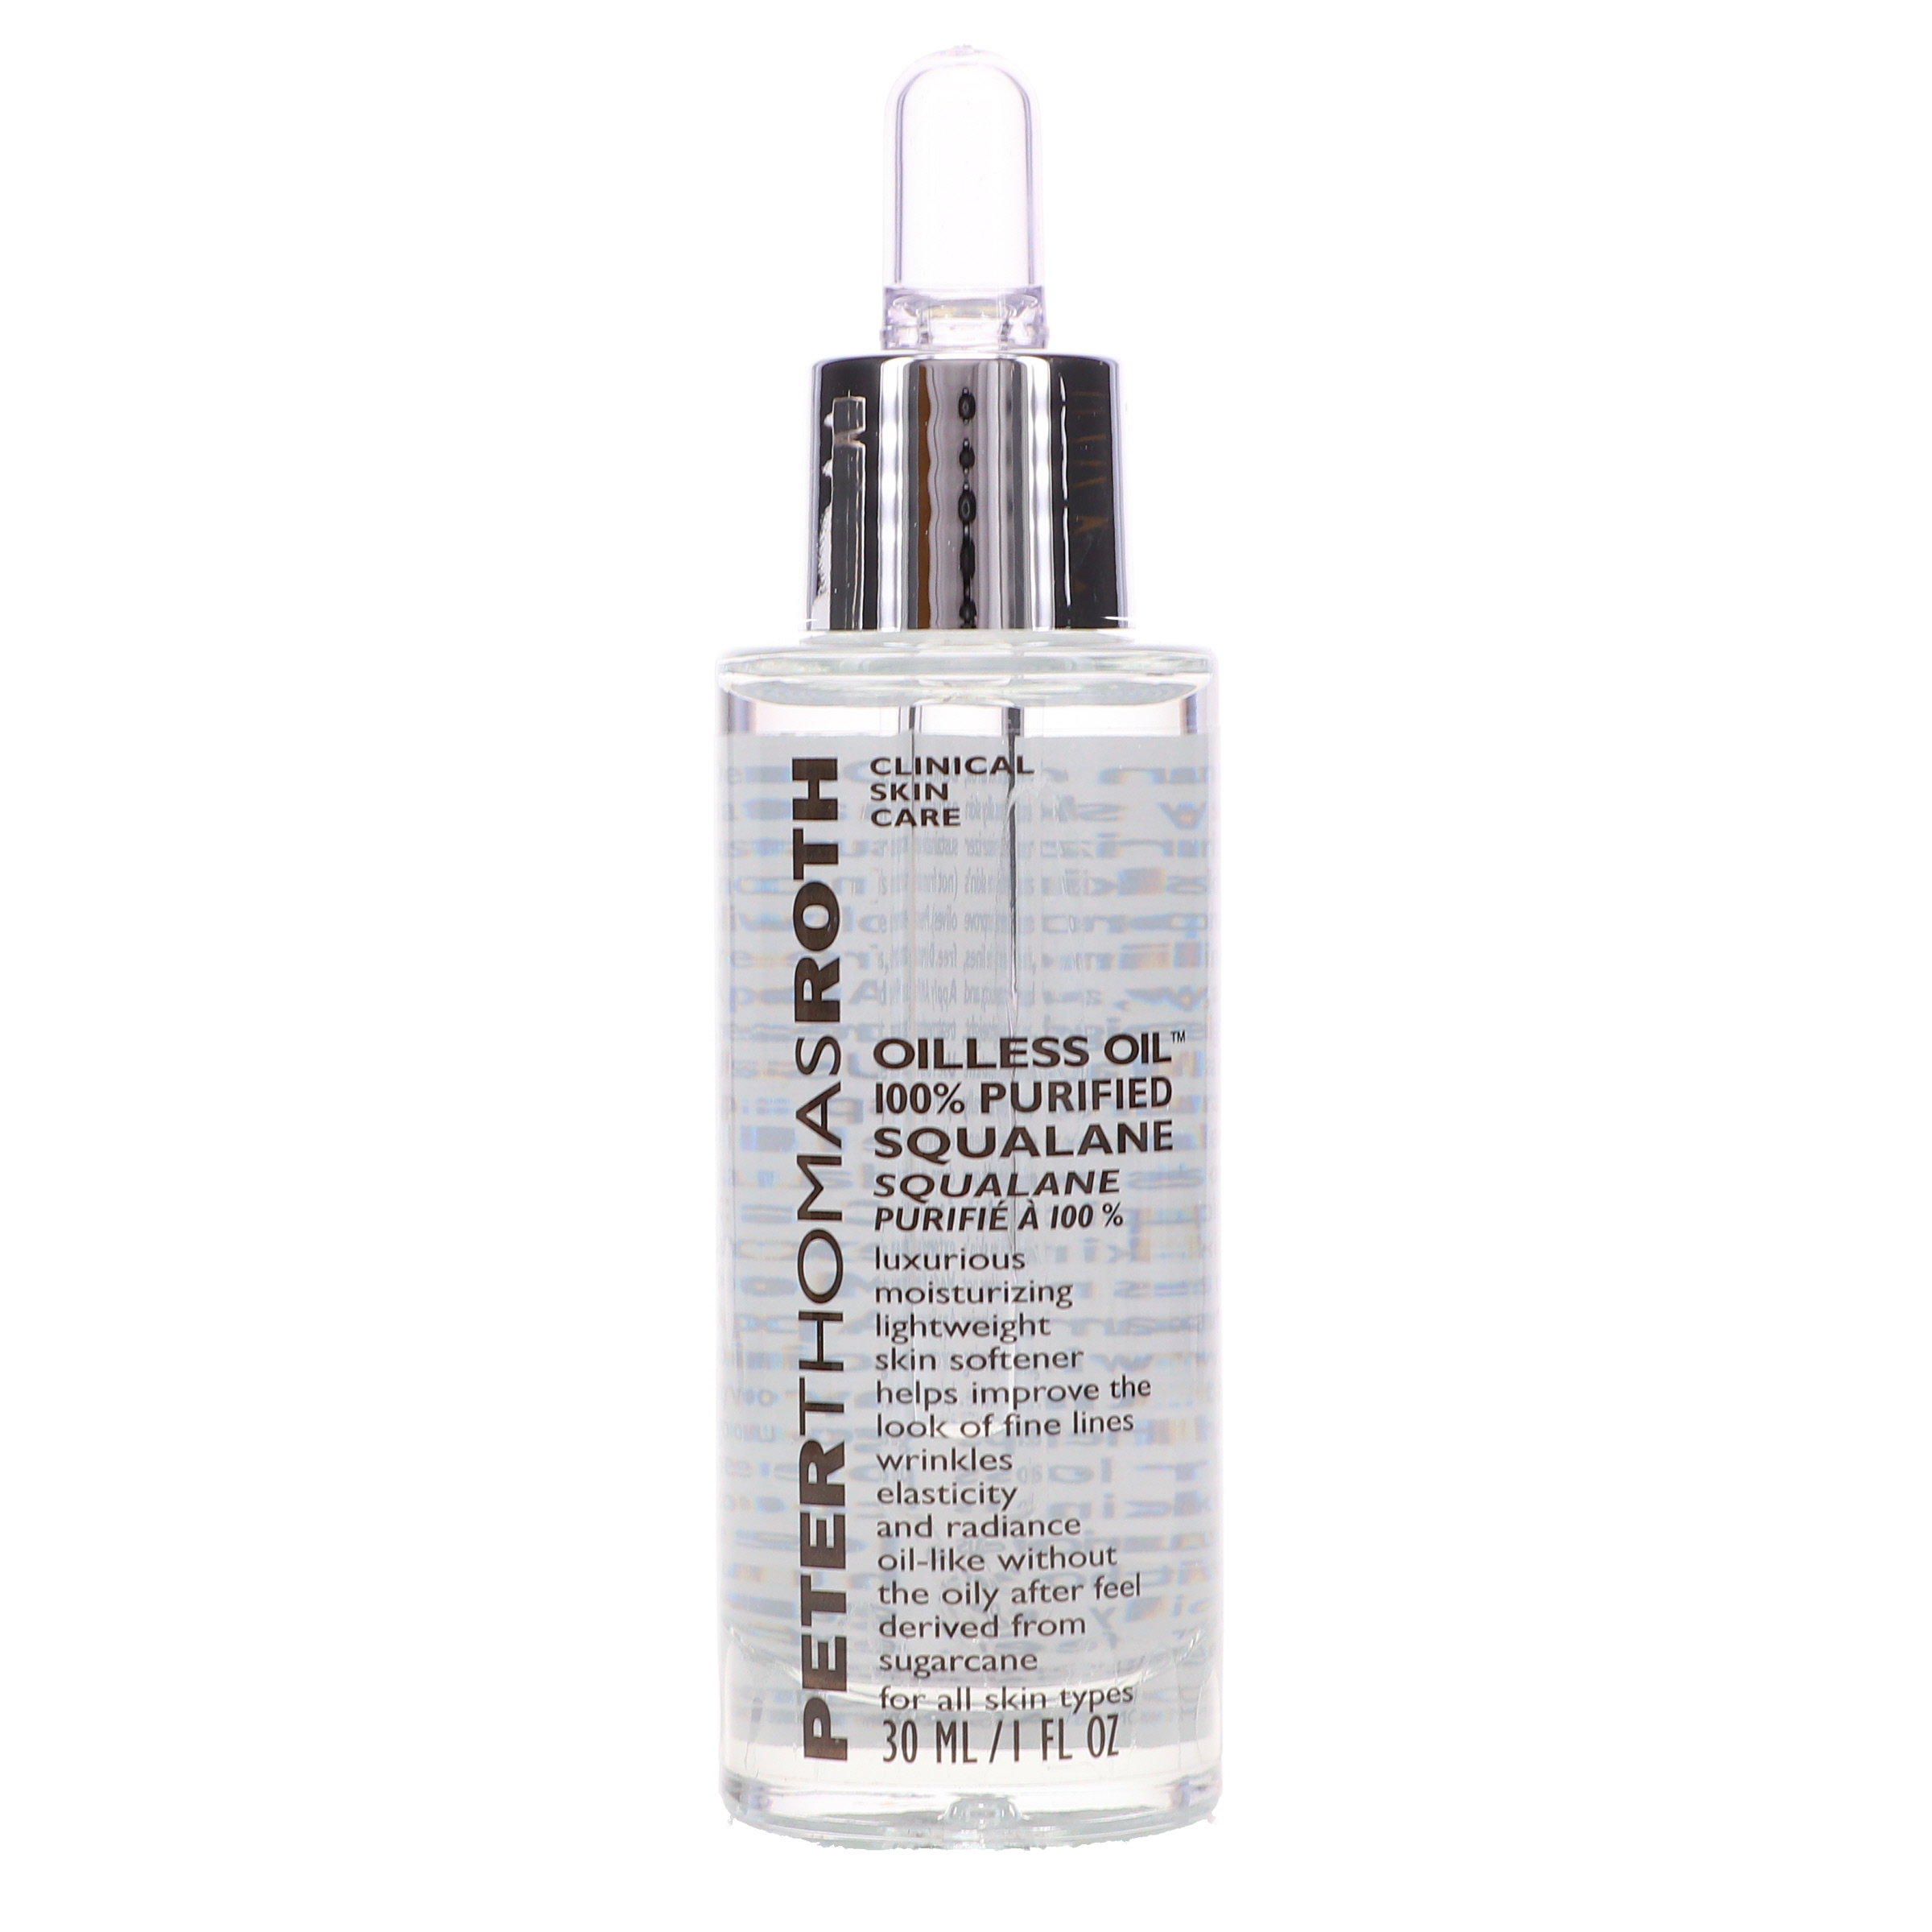 Peter Thomas Roth 100% Purified Squalane Oilless Oil 1 oz - image 1 of 8